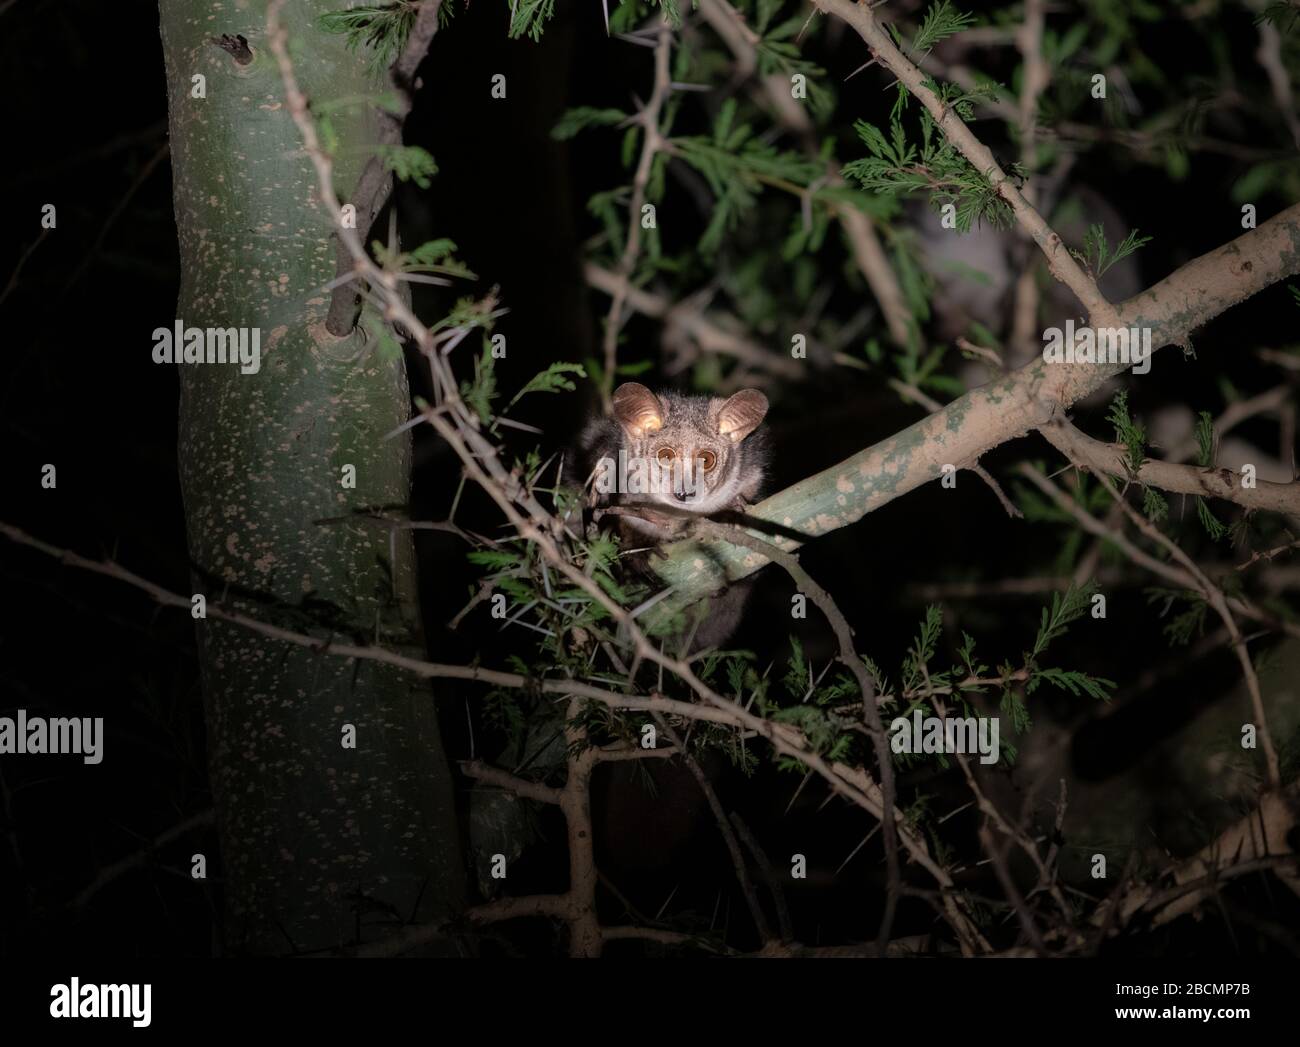 Greater galagos or thick-tailed bushbabies on a night safari in South Africa. Stock Photo